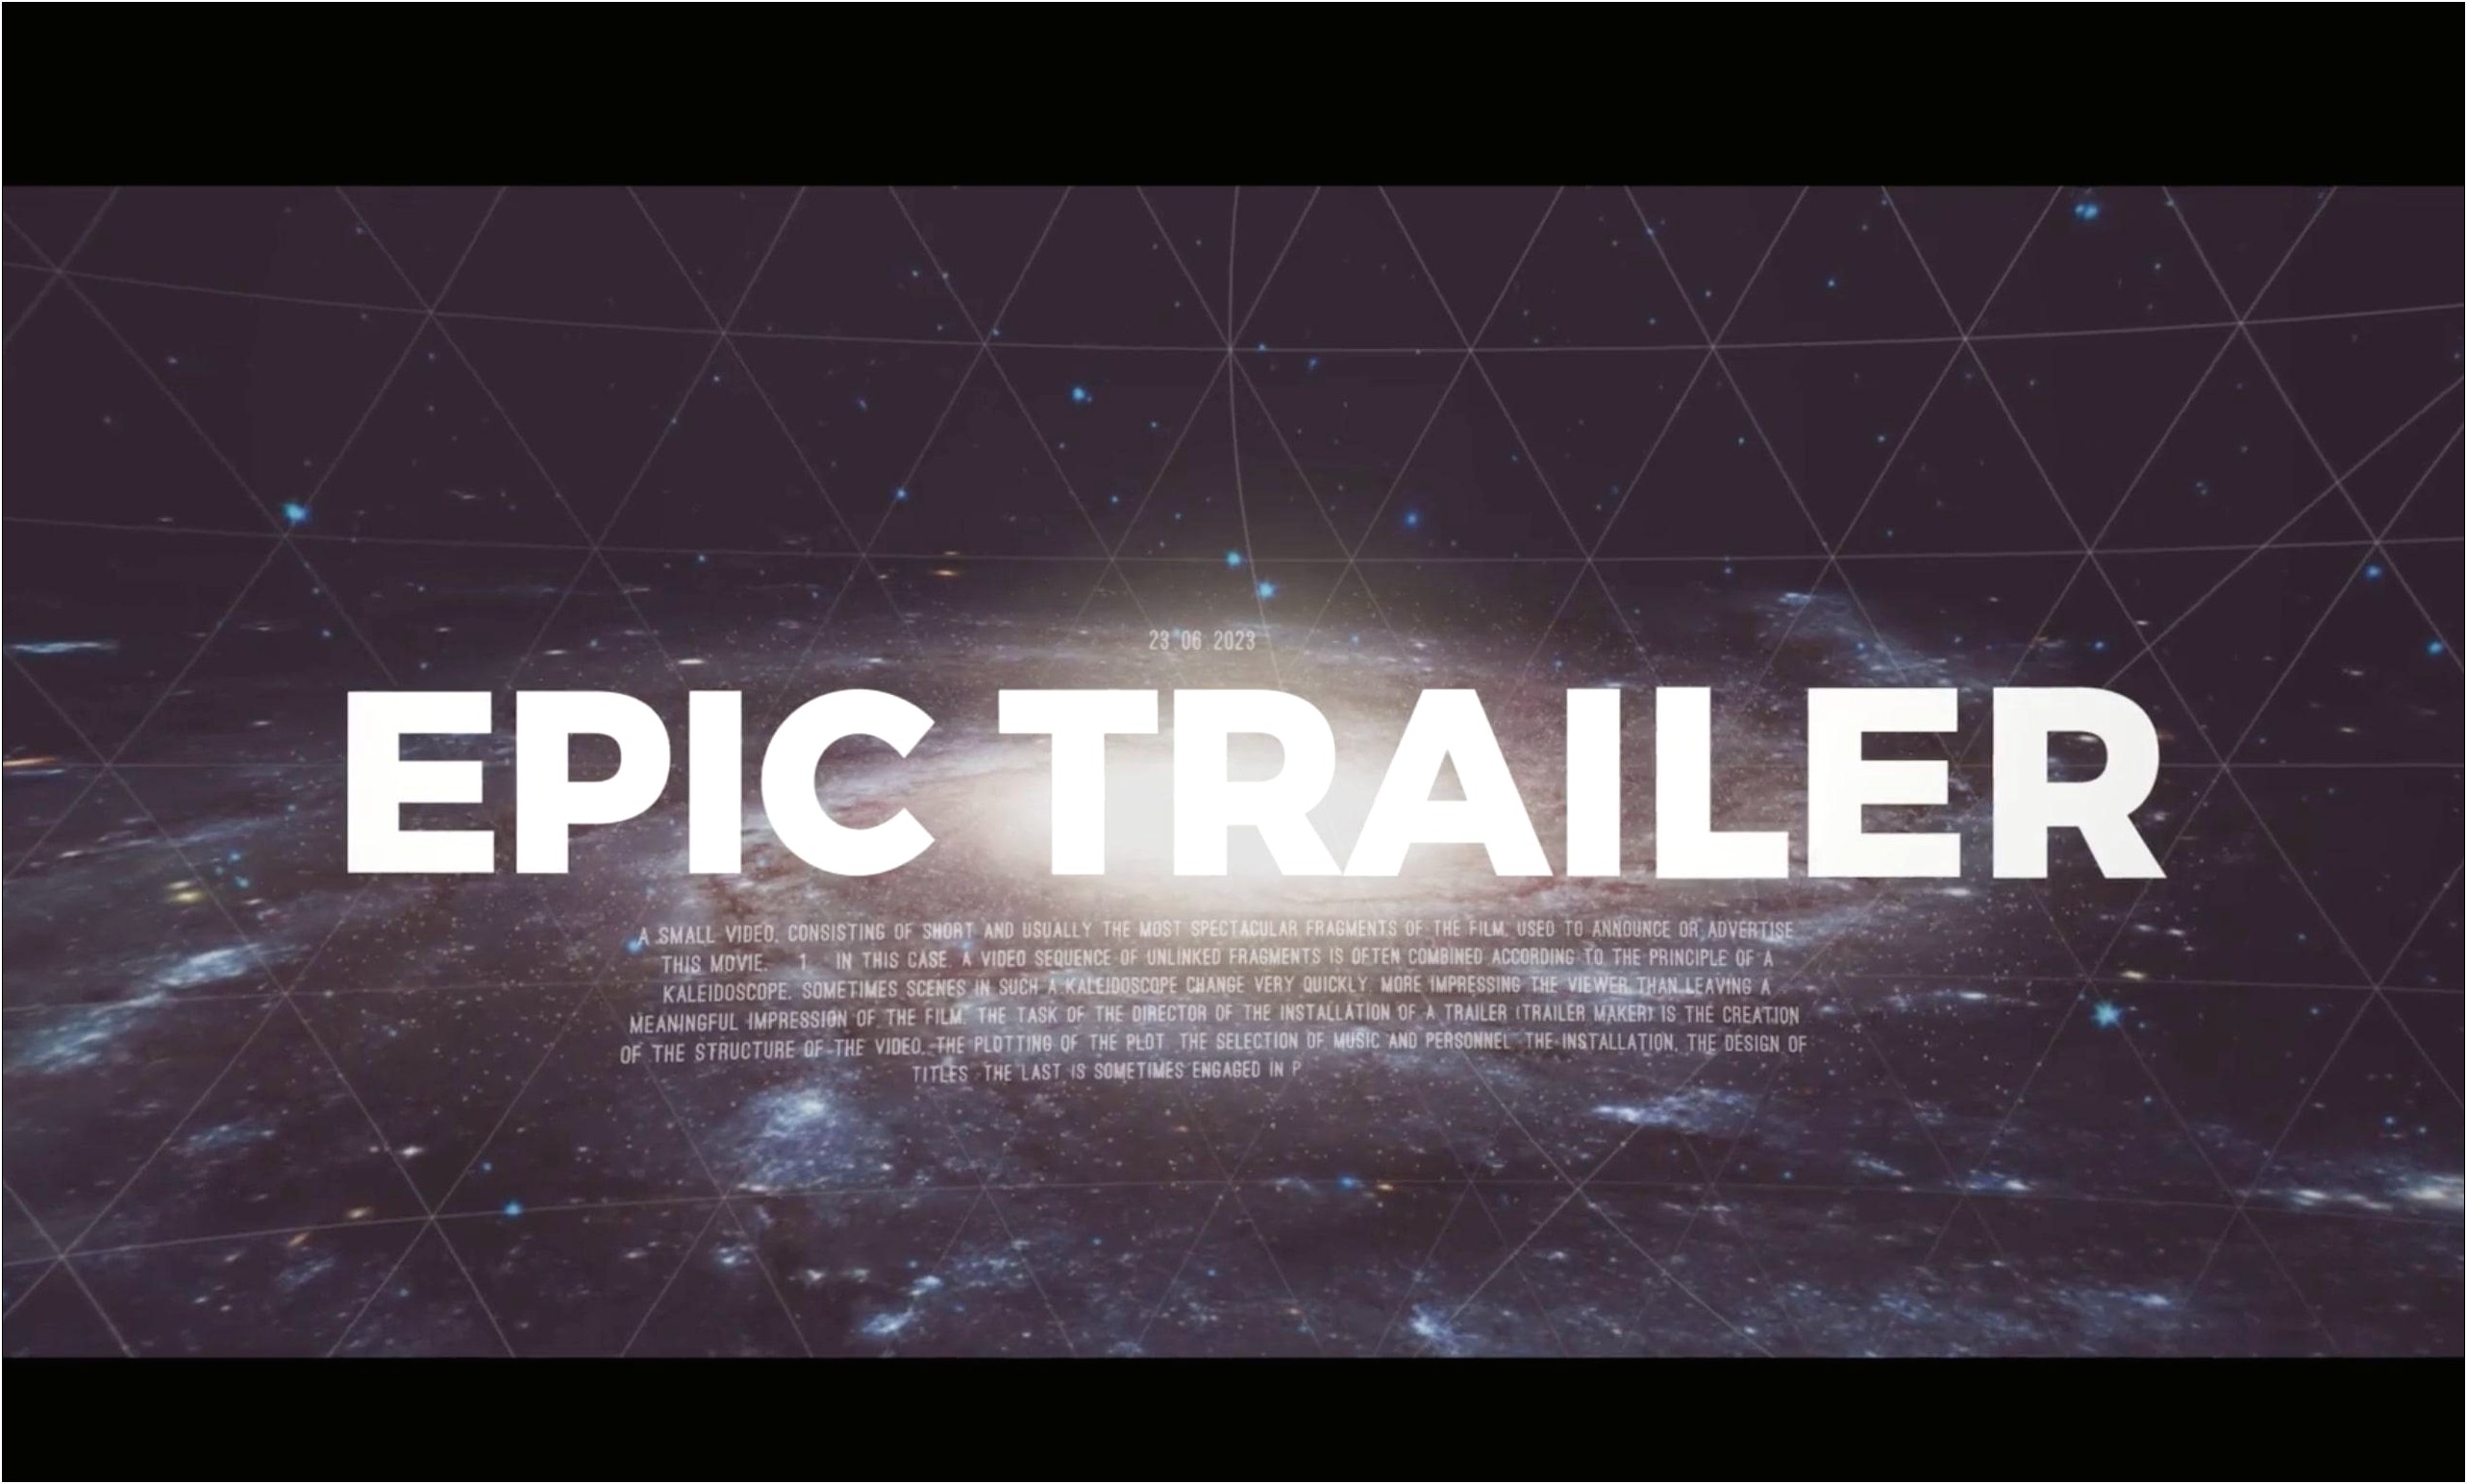 Epic Trailer After Effects Template Free